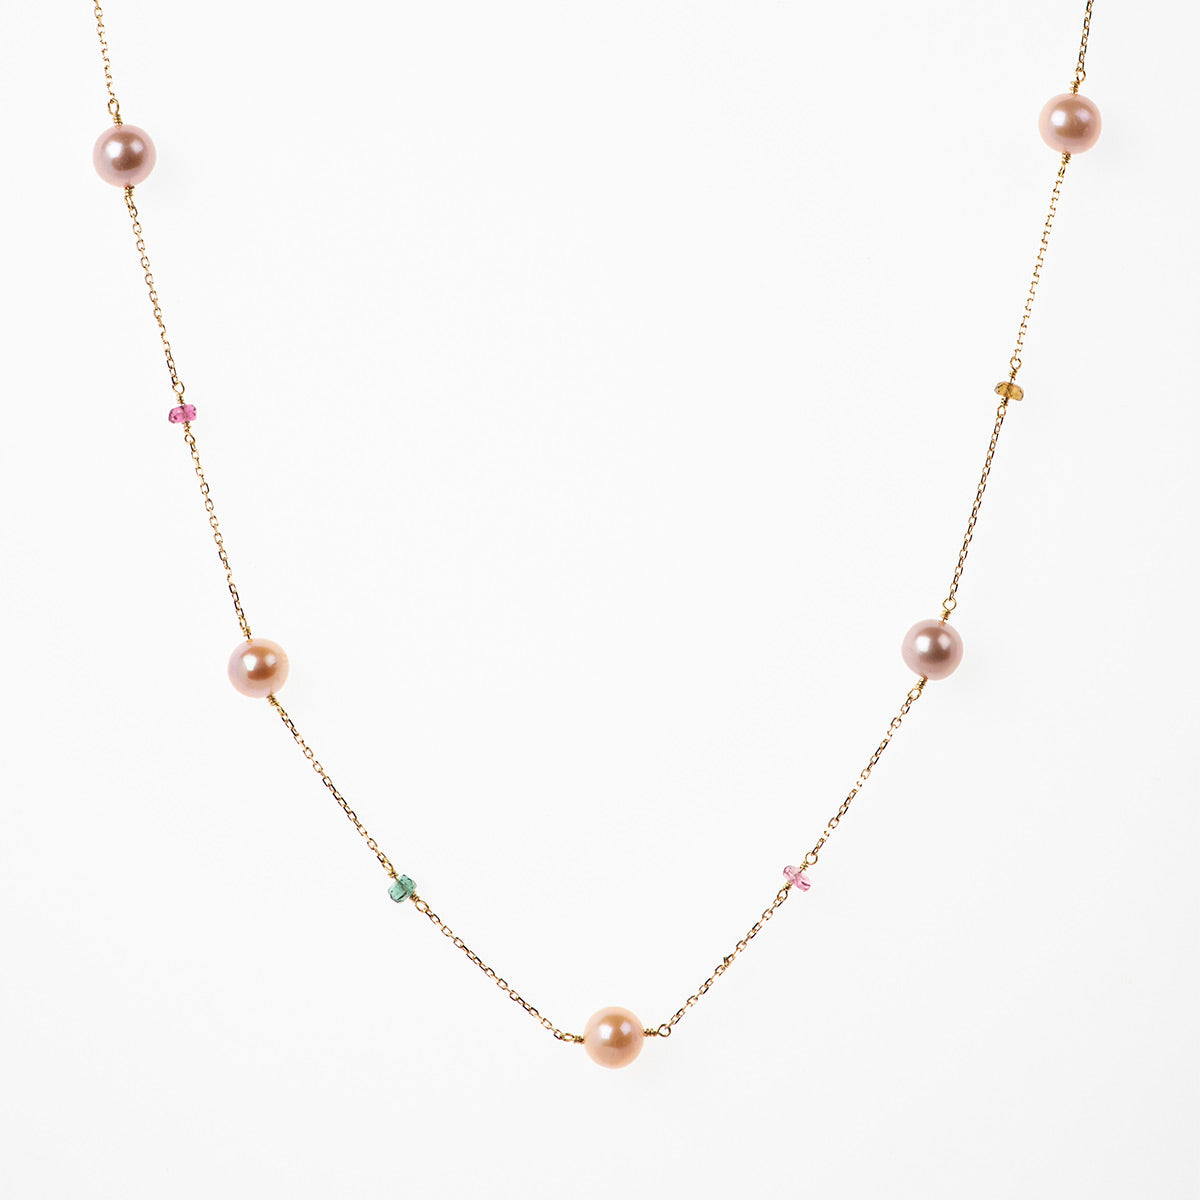 Pink Orange Pearls Necklace with Tourmalines - Politia Jewelry